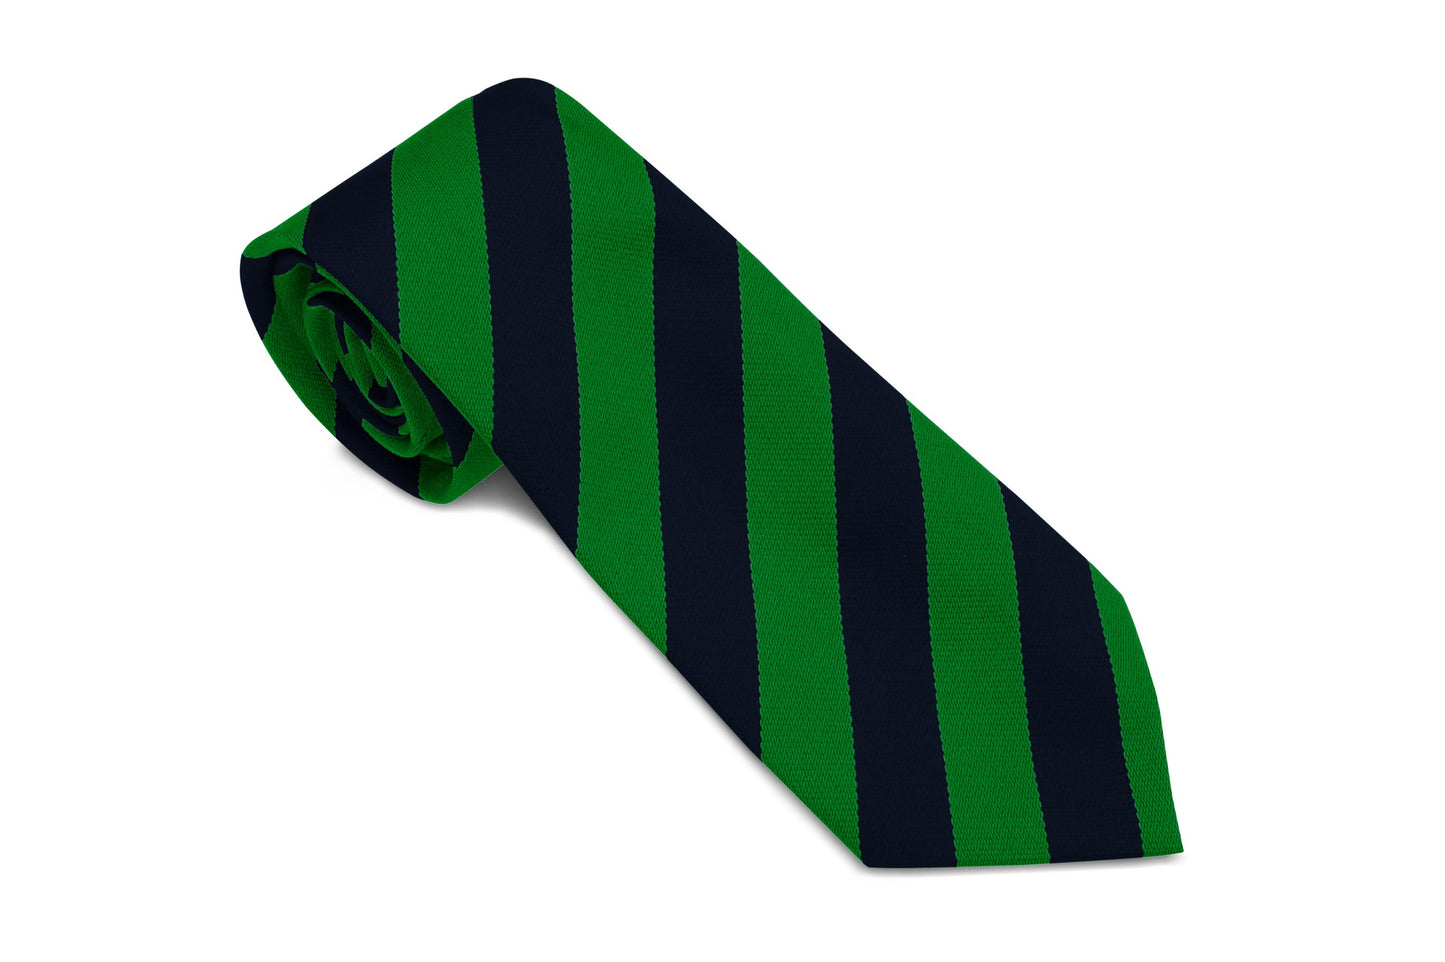 Stock Design Ties in Navy and Emerald Equal Stripe (5404-9519) - Lynendo Trade Store